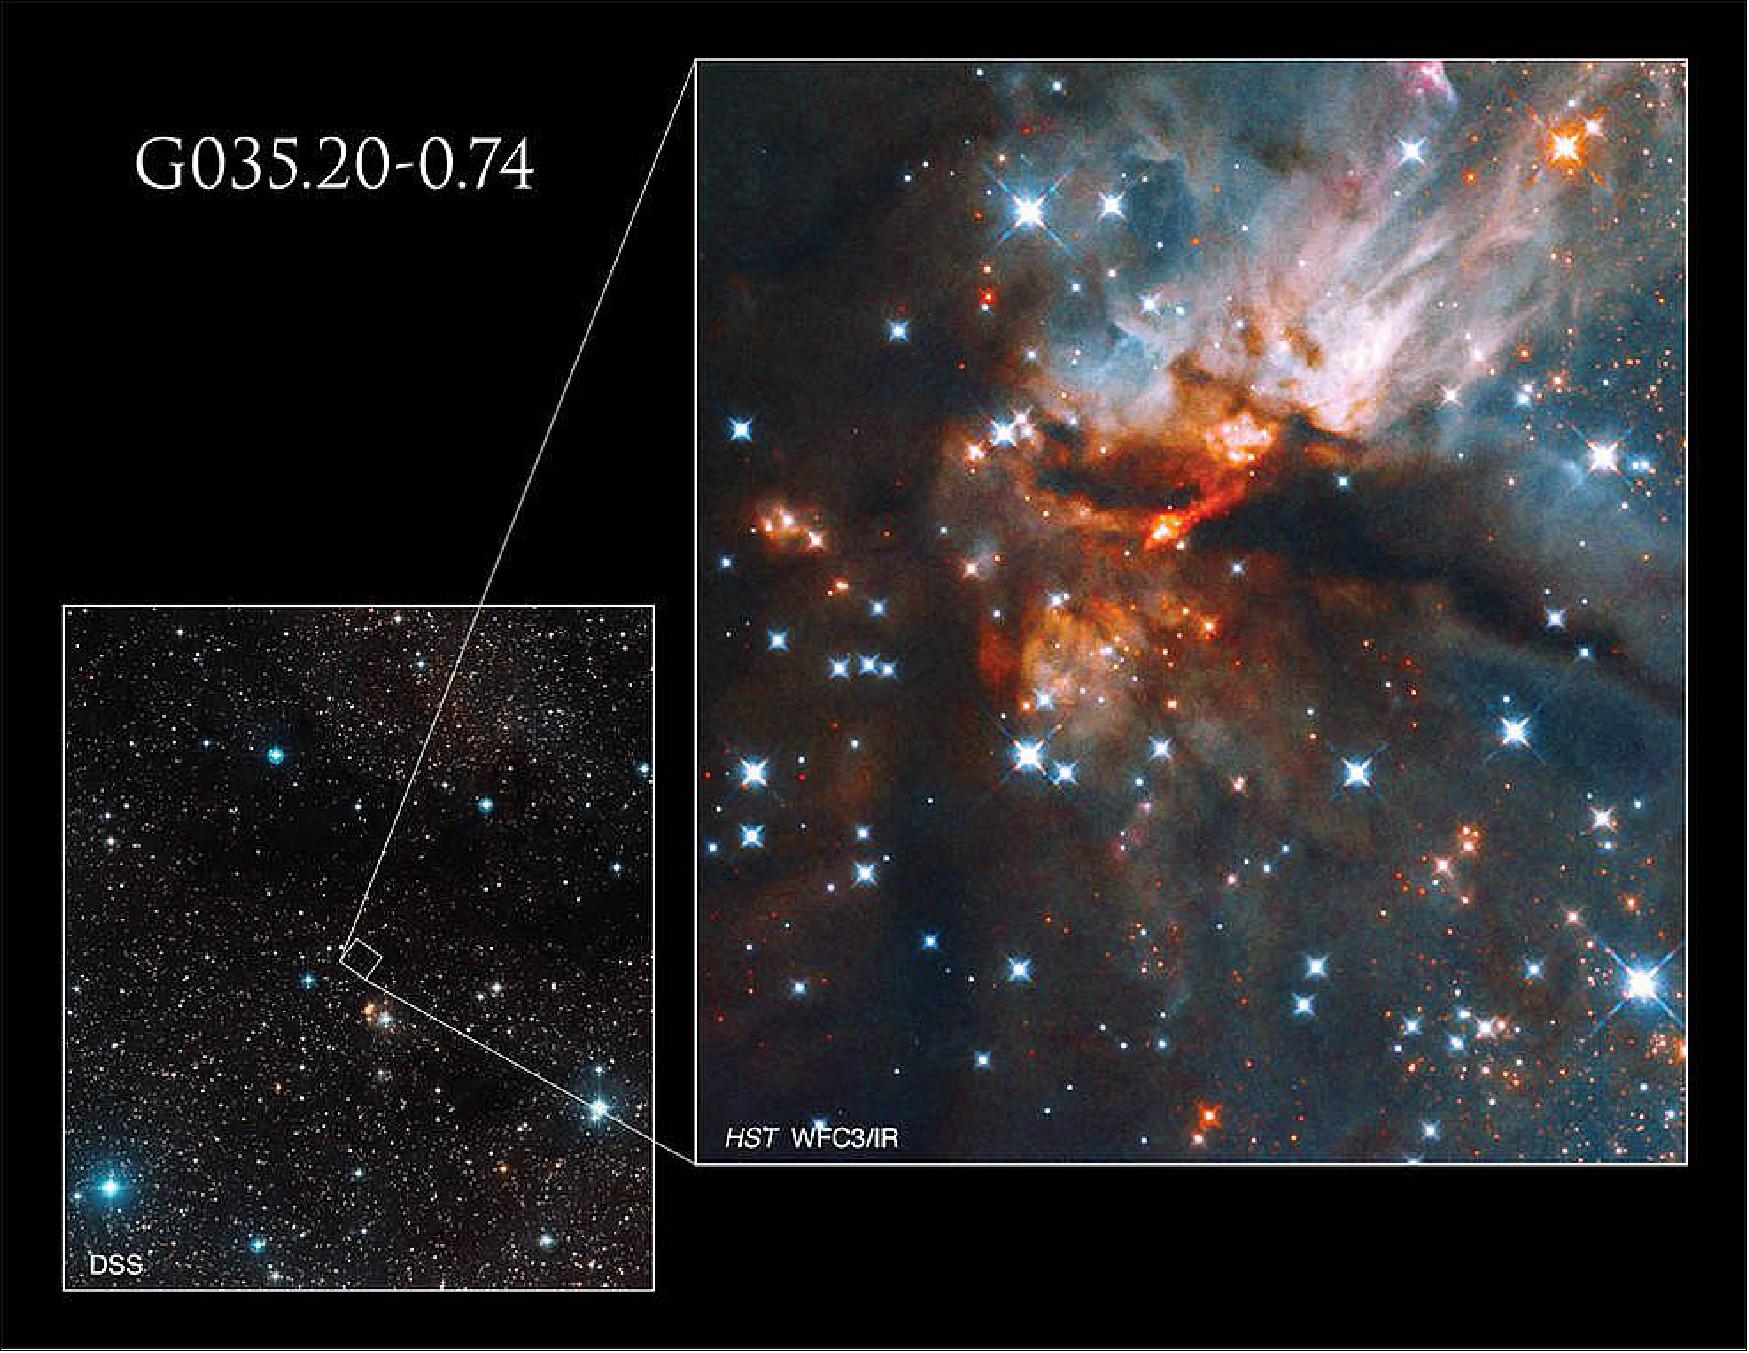 Figure 20: The star-forming nebula (G035.20-0.74) in this Hubble image is in the constellation Aquila, the Eagle [image credits: NASA, ESA, J. Tan (Chalmers University of Technology), and DSS; Processing; Gladys Kober (NASA/Catholic University of America)]